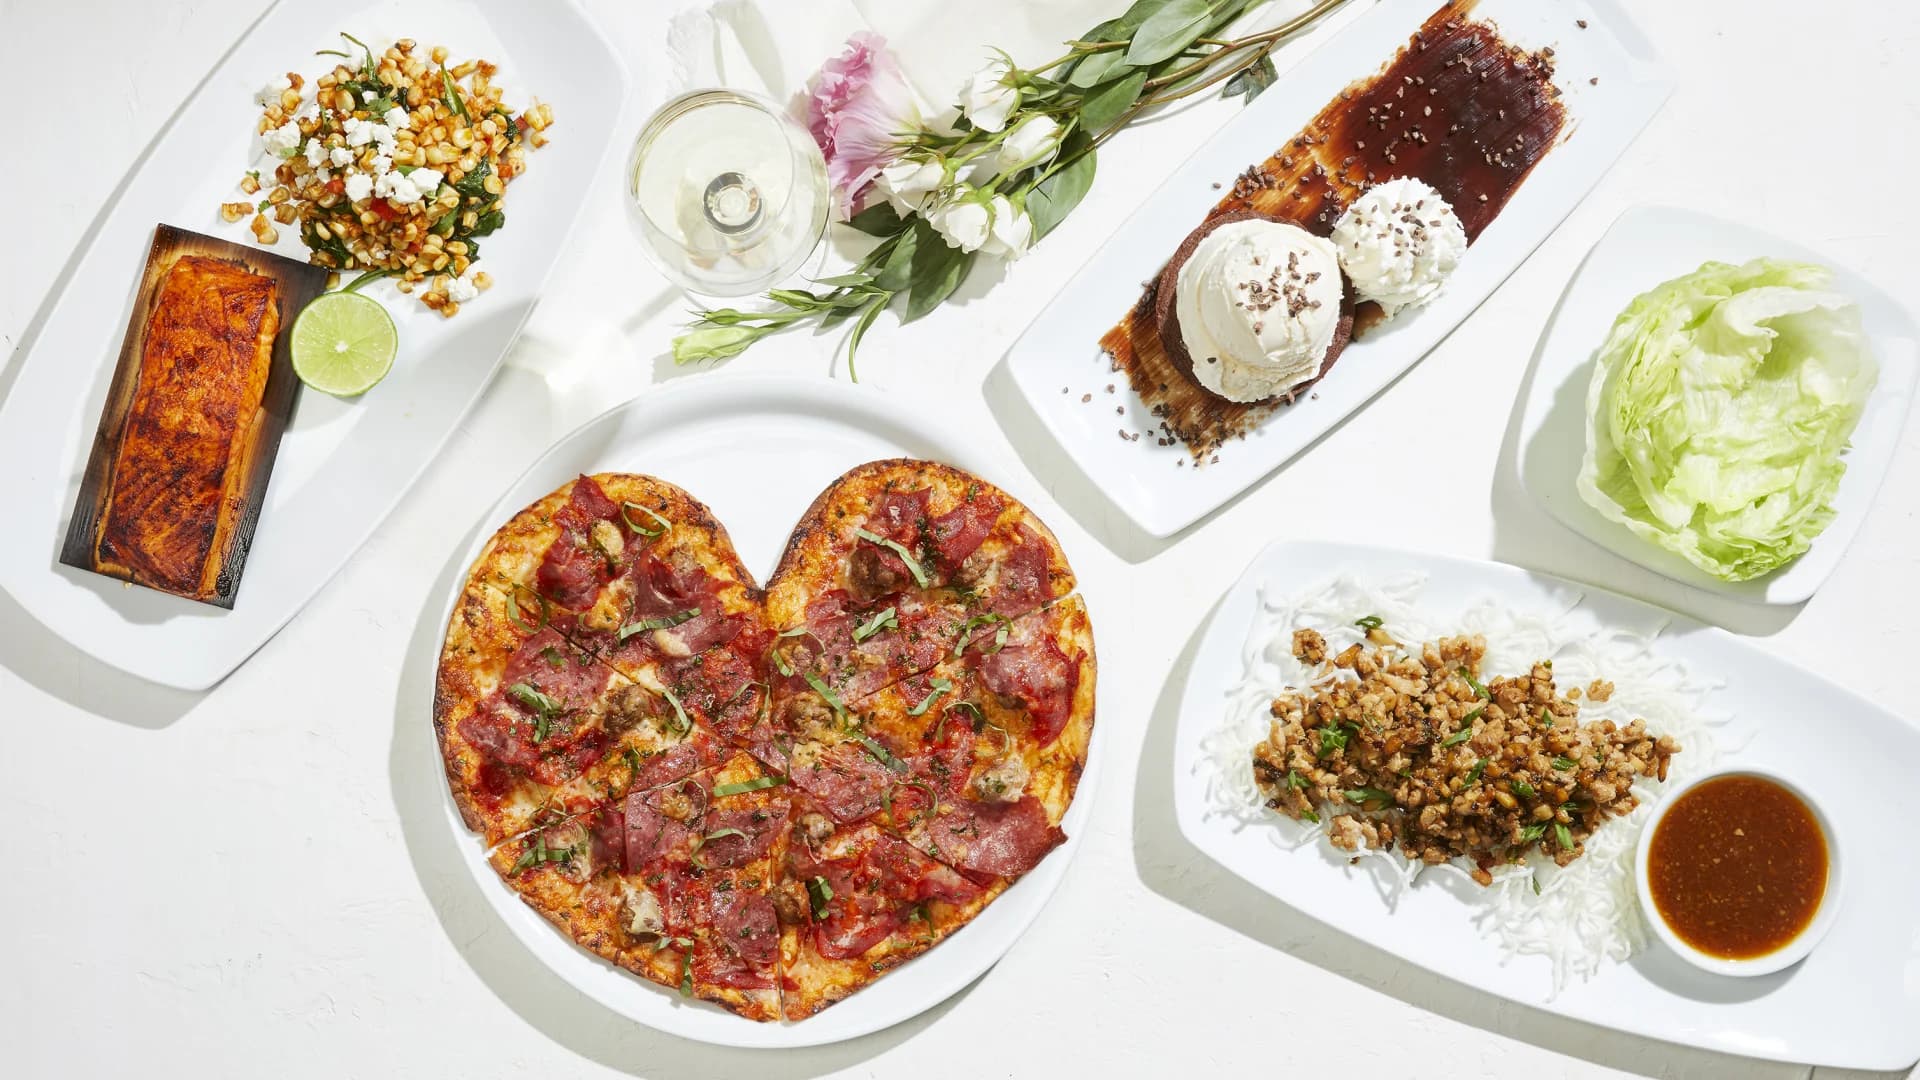 Where to get heart-shaped pizza for Valentine's Day in the Hudson Valley